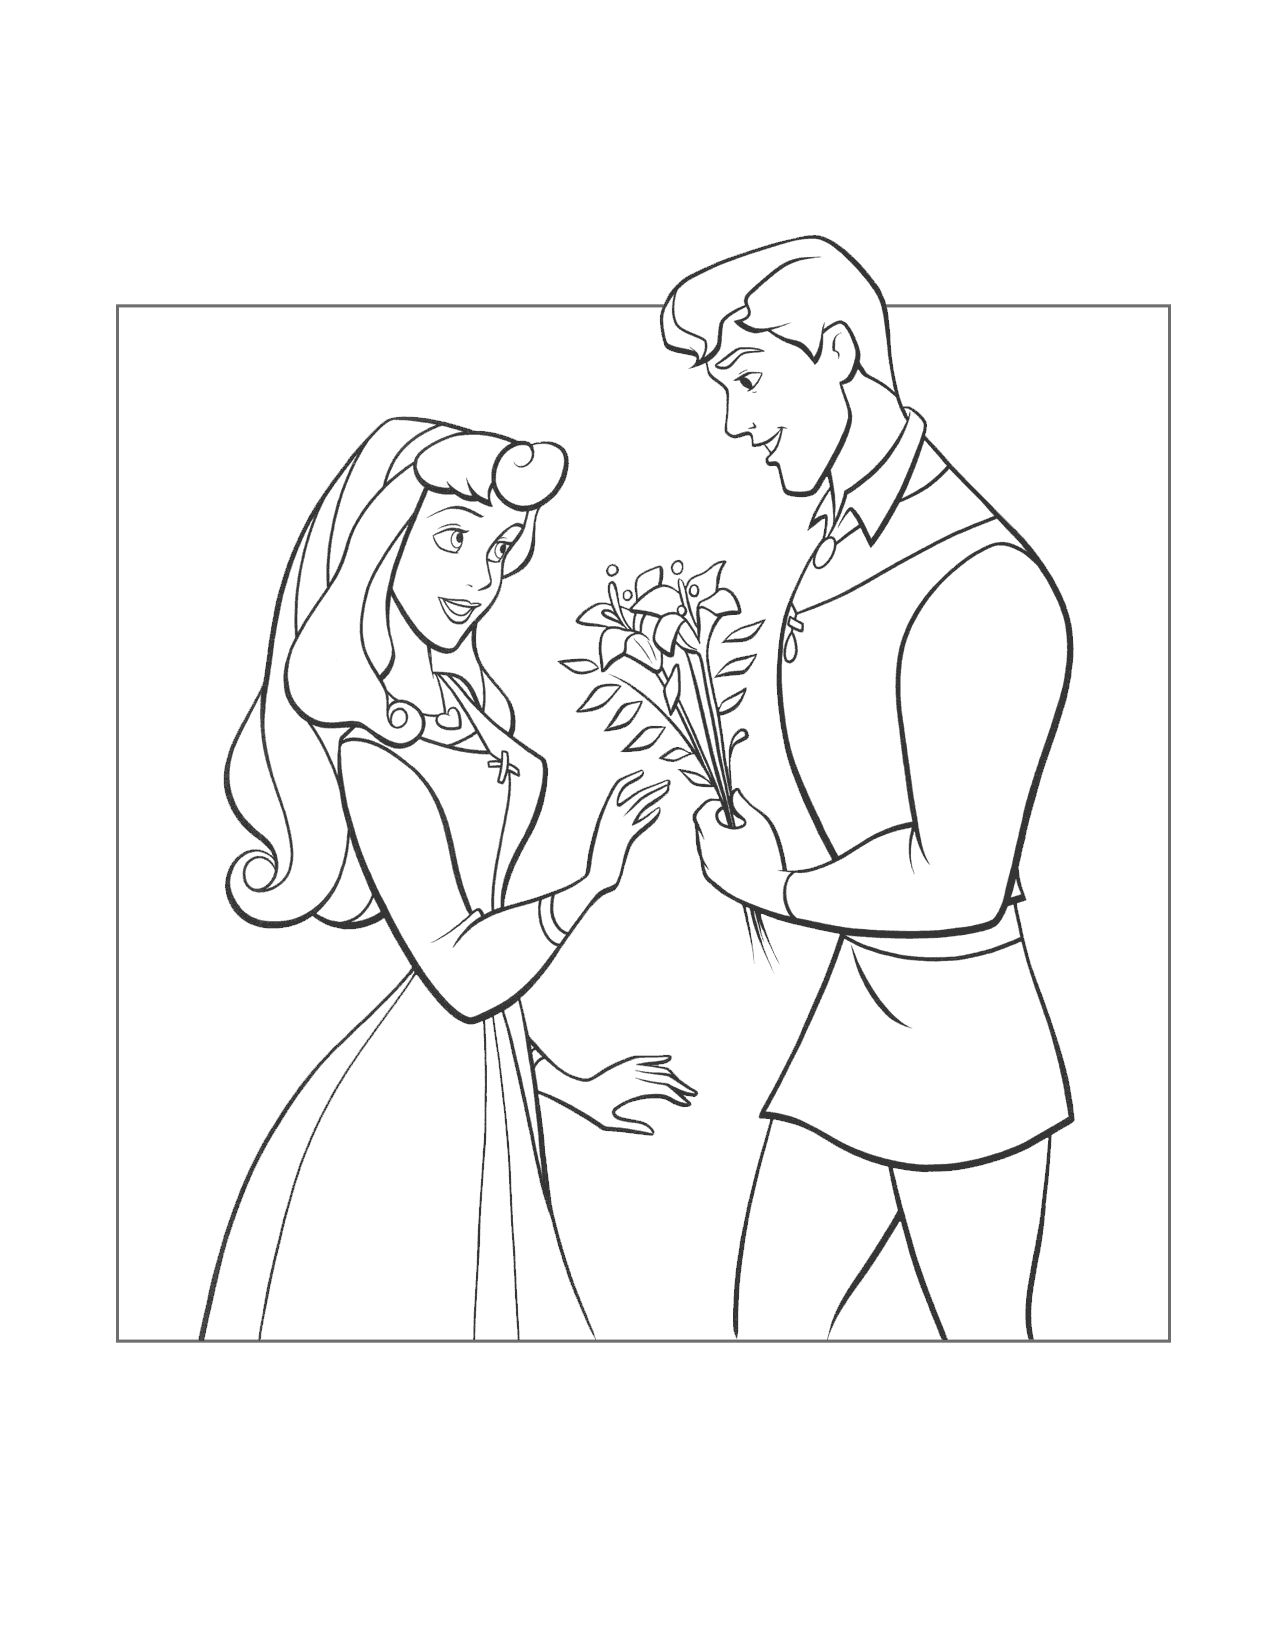 Phillip Gives Aurora Flowers Sleeping Beauty Coloring Page